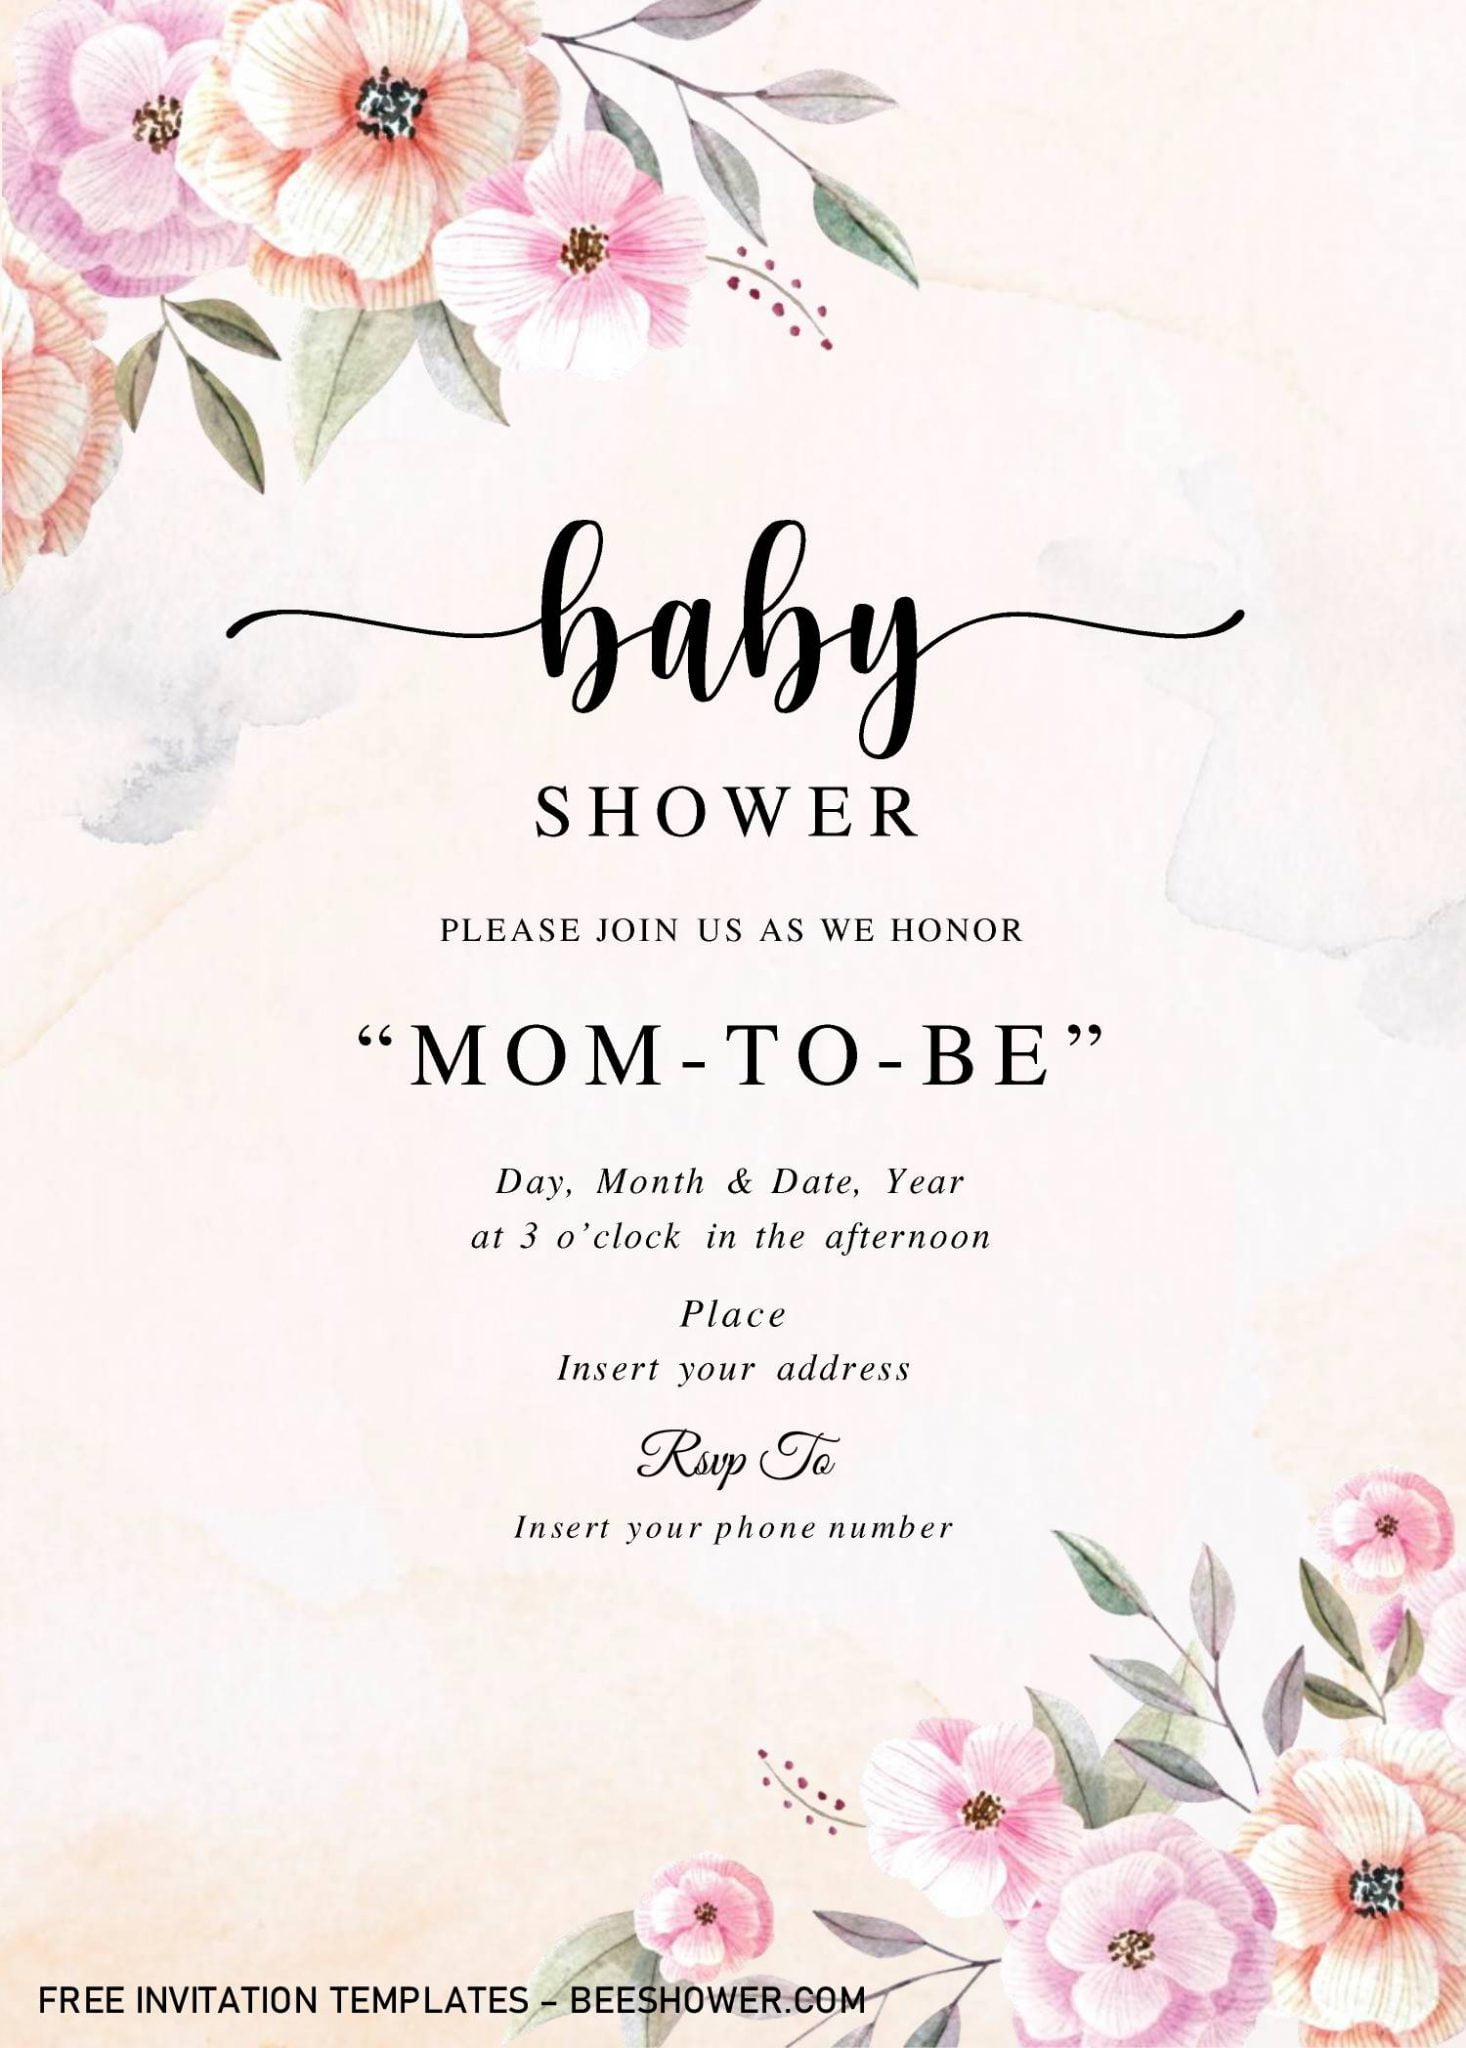 rustic-floral-baby-shower-invitation-templates-editable-with-microsoft-word-free-printable